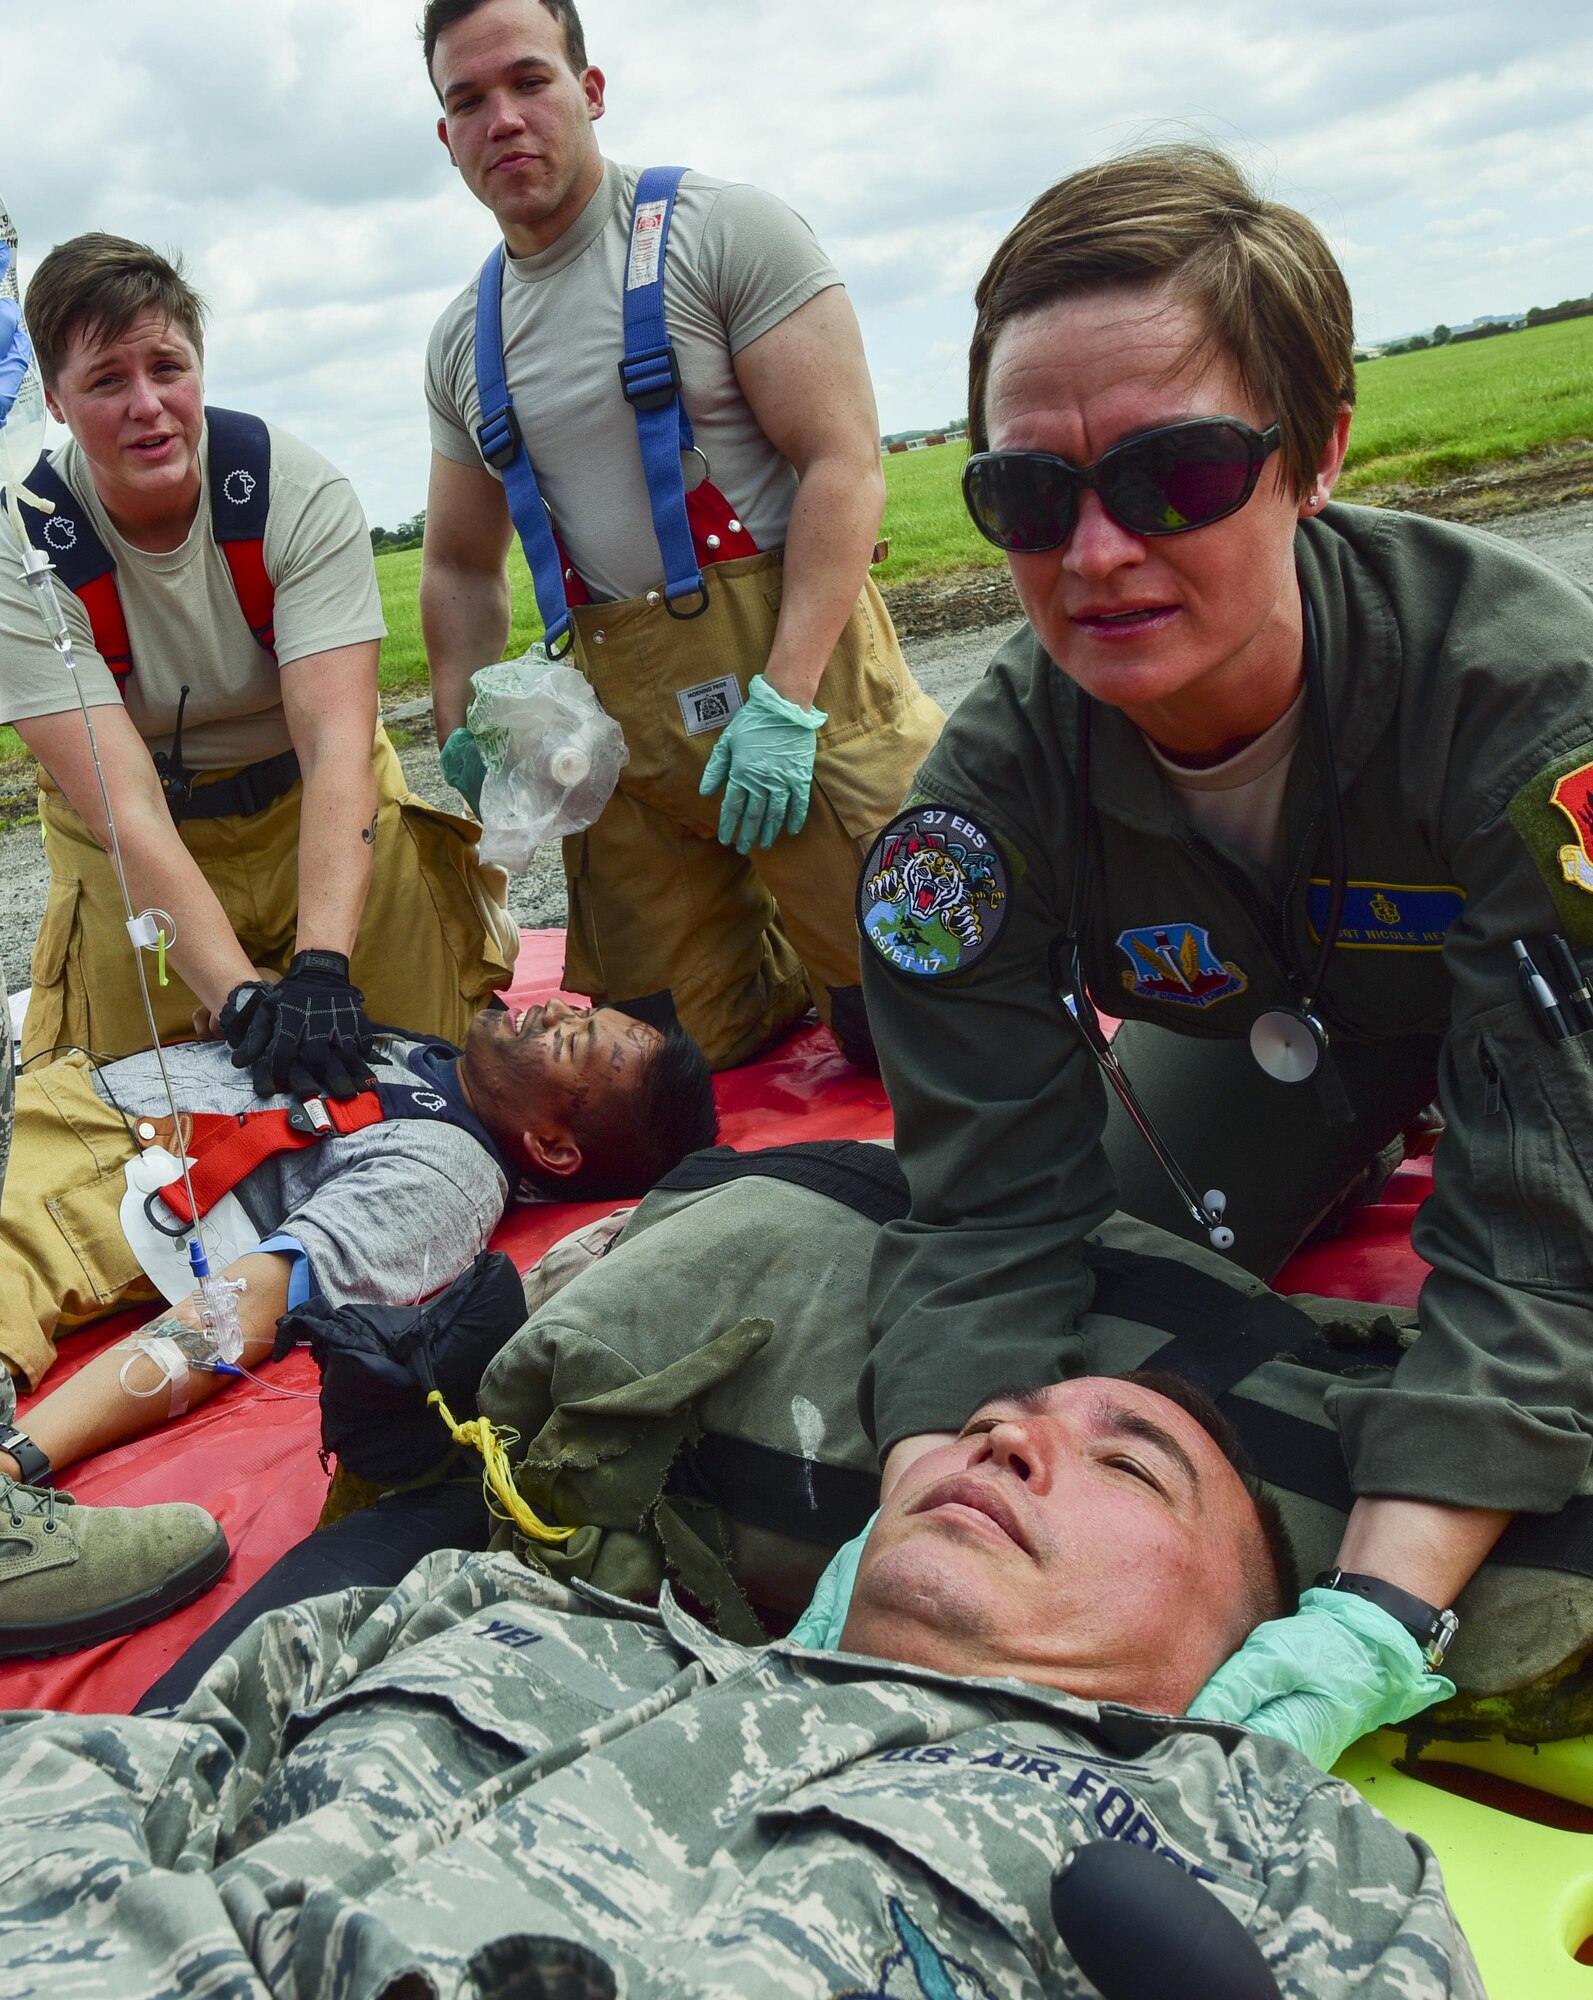 U.S. Air Force Tech. Sgt. Nicole Henry (far right), 37th Expeditionary Bomb Squadron flight, and an operational medical technician, support the head of a volunteer during a medical exercise at Royal Air Force Fairford, U.K., June 13, 2017. Four medical Airmen from the 110th Bomb Squadron and the 37th Expeditionary Bomb Squadron serve roughly 800 Airmen at RAF Fairford in support of bomber assurance missions. (U.S. Air Force photo by Airman 1st Class Randahl J. Jenson)